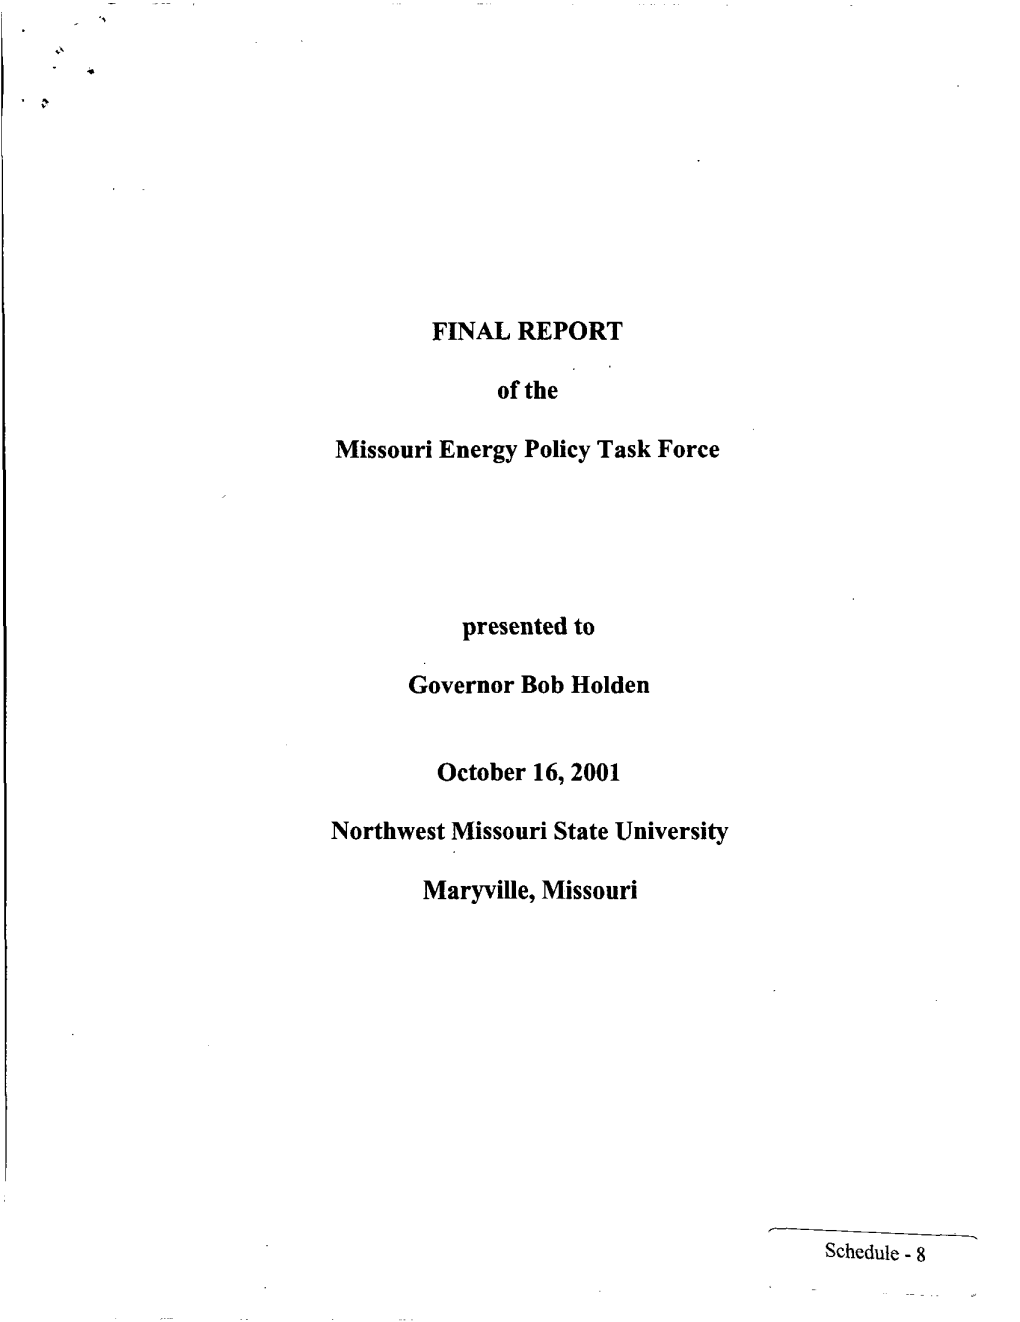 FINAL REPORT of the Missouri Energy Policy Task Force